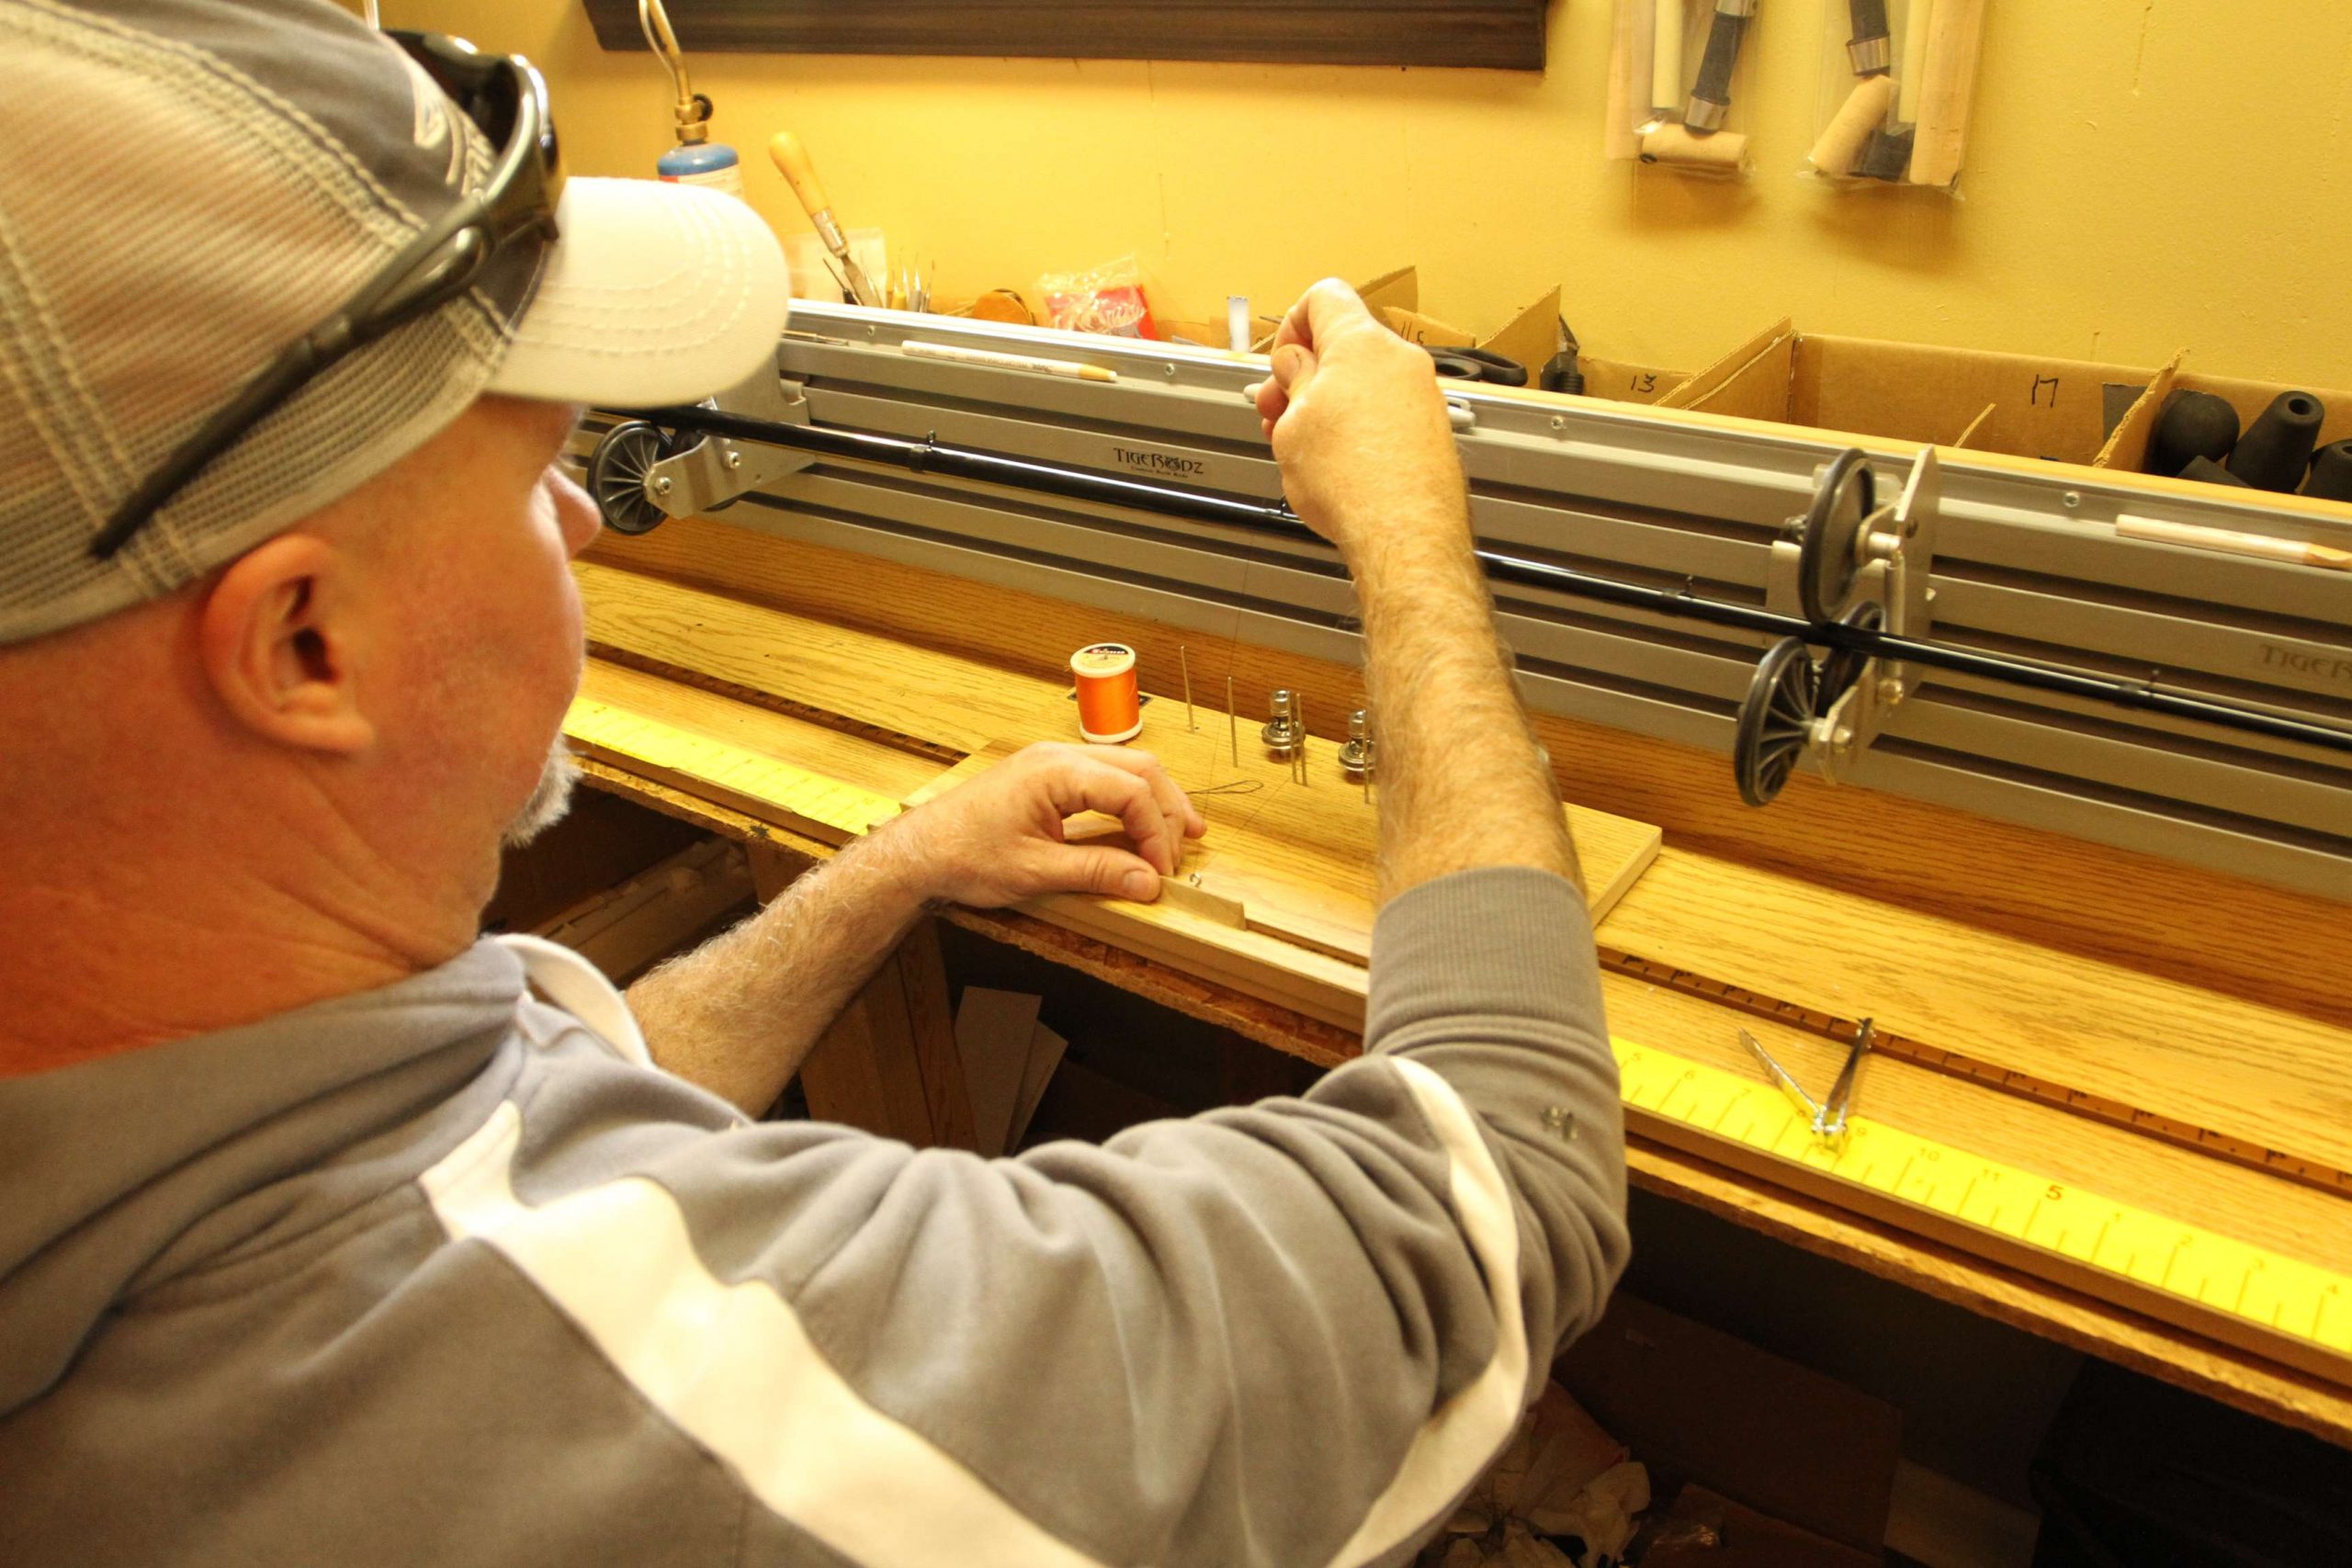 Dobbins says this part is where the right equipment makes the job very simple, but it takes practice. Don't expect your first rod to be perfect. After thousands of rods pushed through his shop, he's become very proficient at this process. 